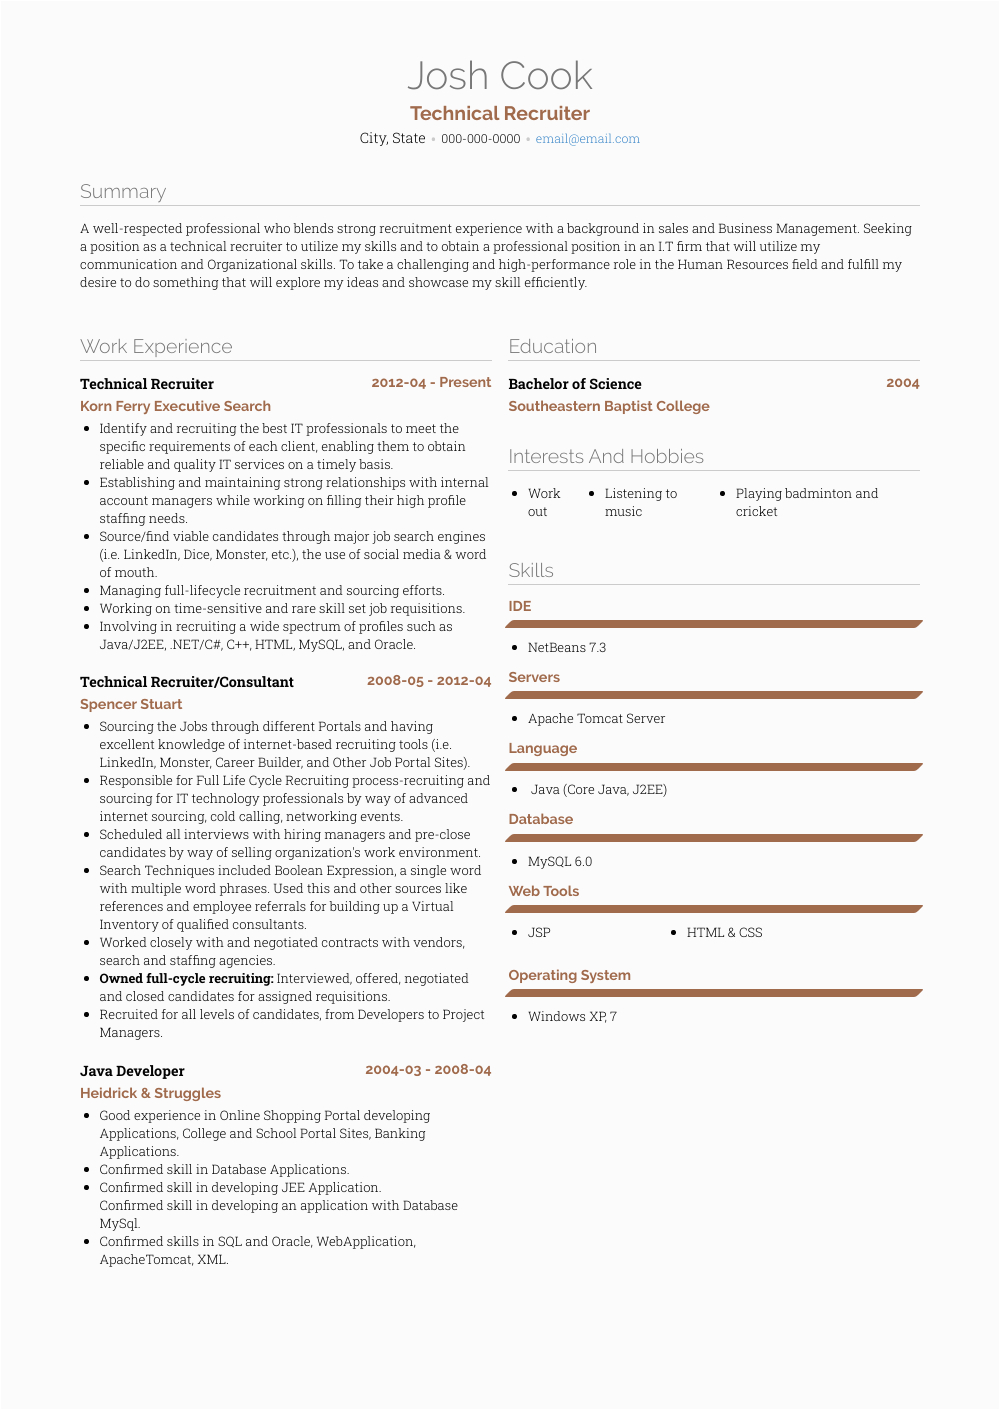 Sample Resume for It Recruiter India Recruiter Resume Samples and Templates